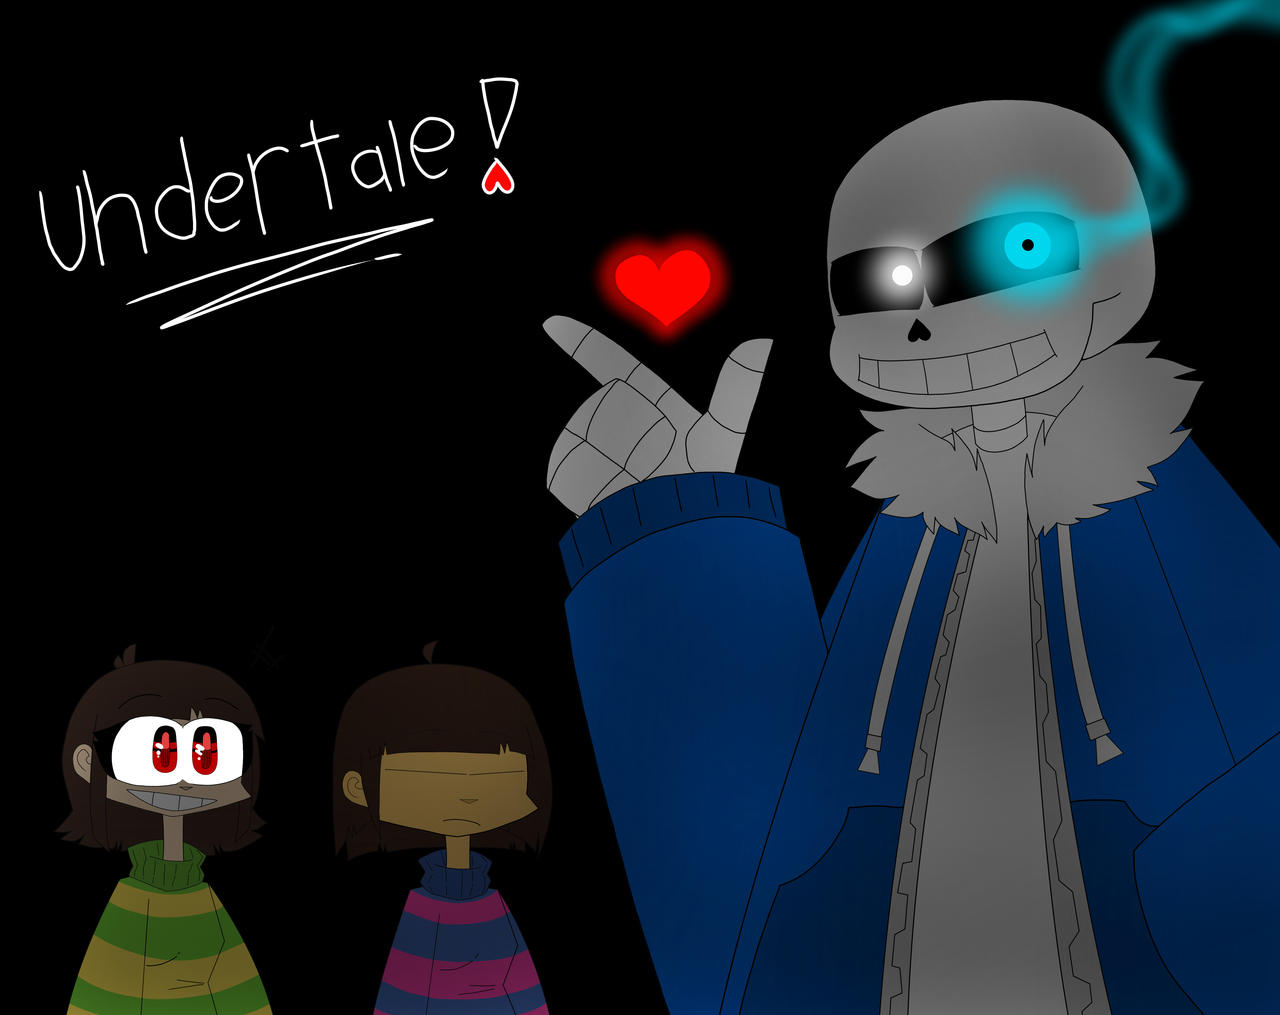 Heres a drawing of Reaper!Sans I did yesterday : r/Undertale